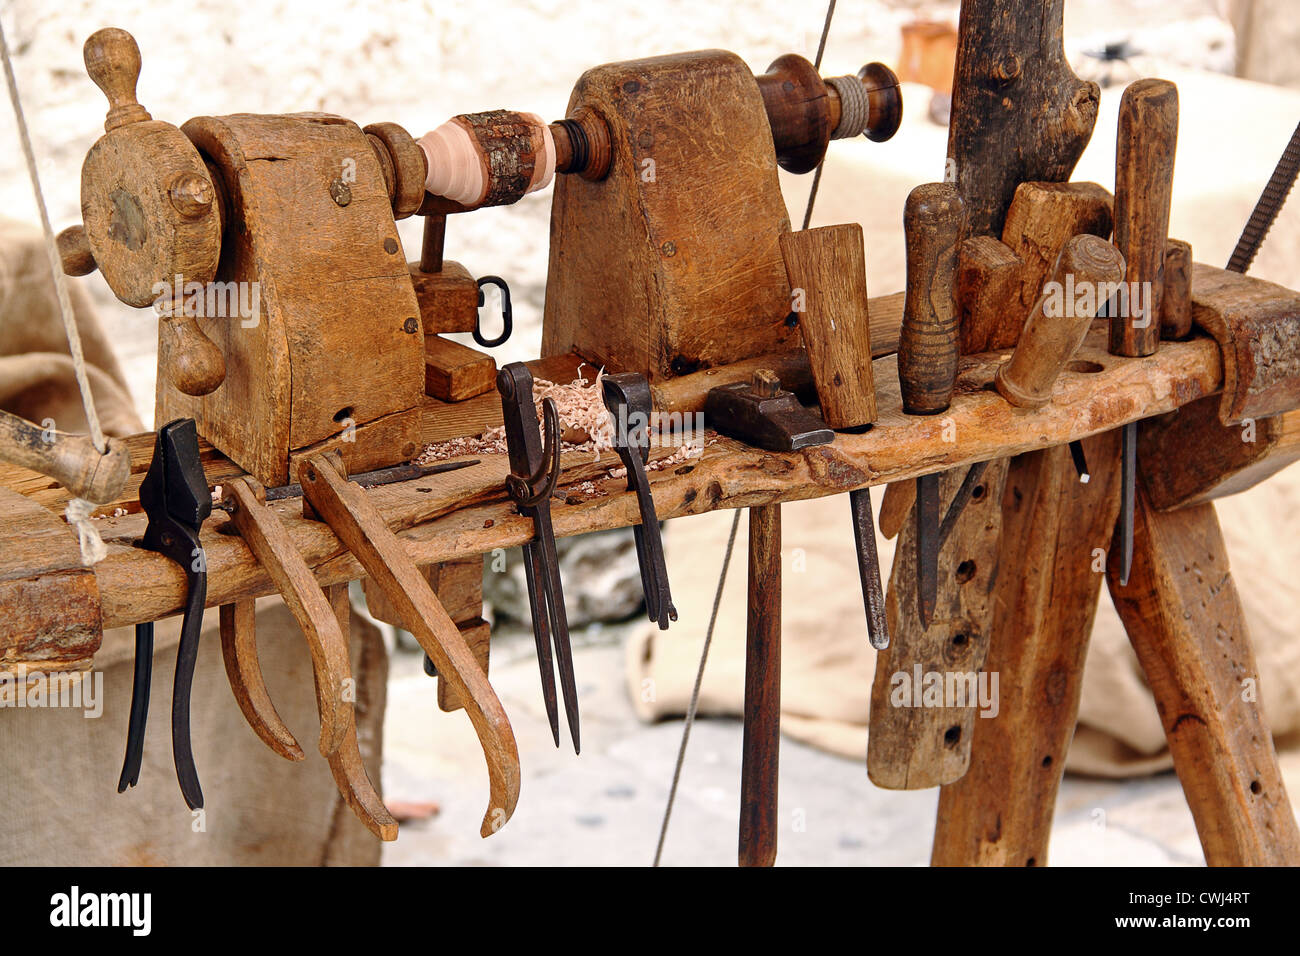 An old lathe with a set of tools for woodworking: hammer, chisels, pliers Stock Photo